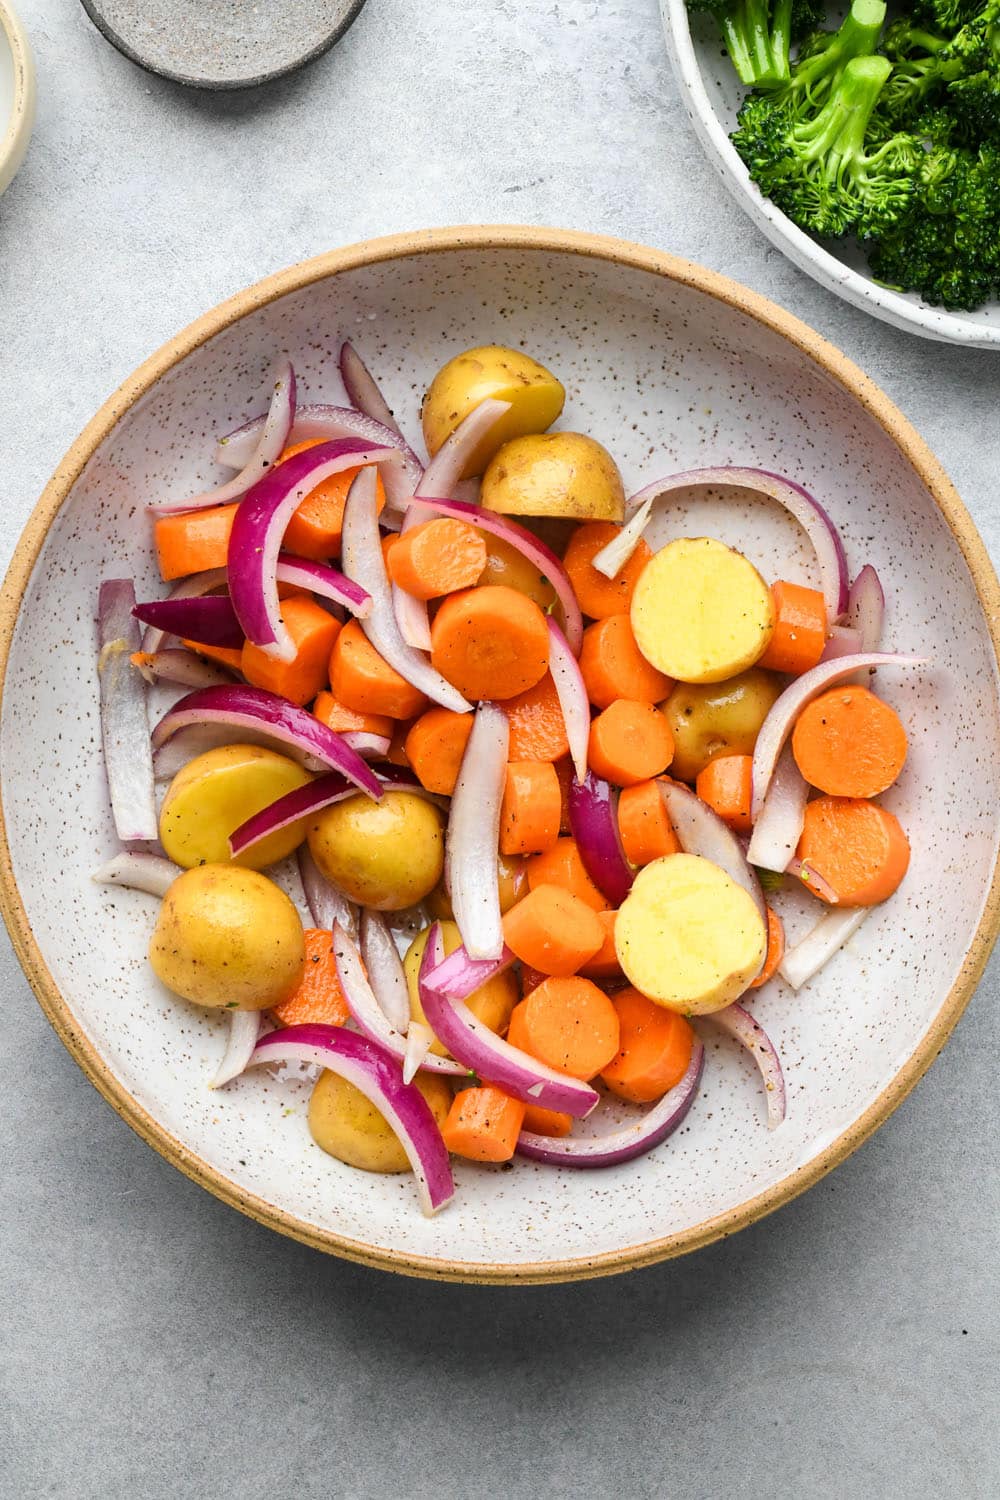 How to make Roasted Veggie Protein Bowls with Turmeric Tahini: Carrots, onions, and potatoes in a large ceramic bowl with broccoli florets on a plate on the side.